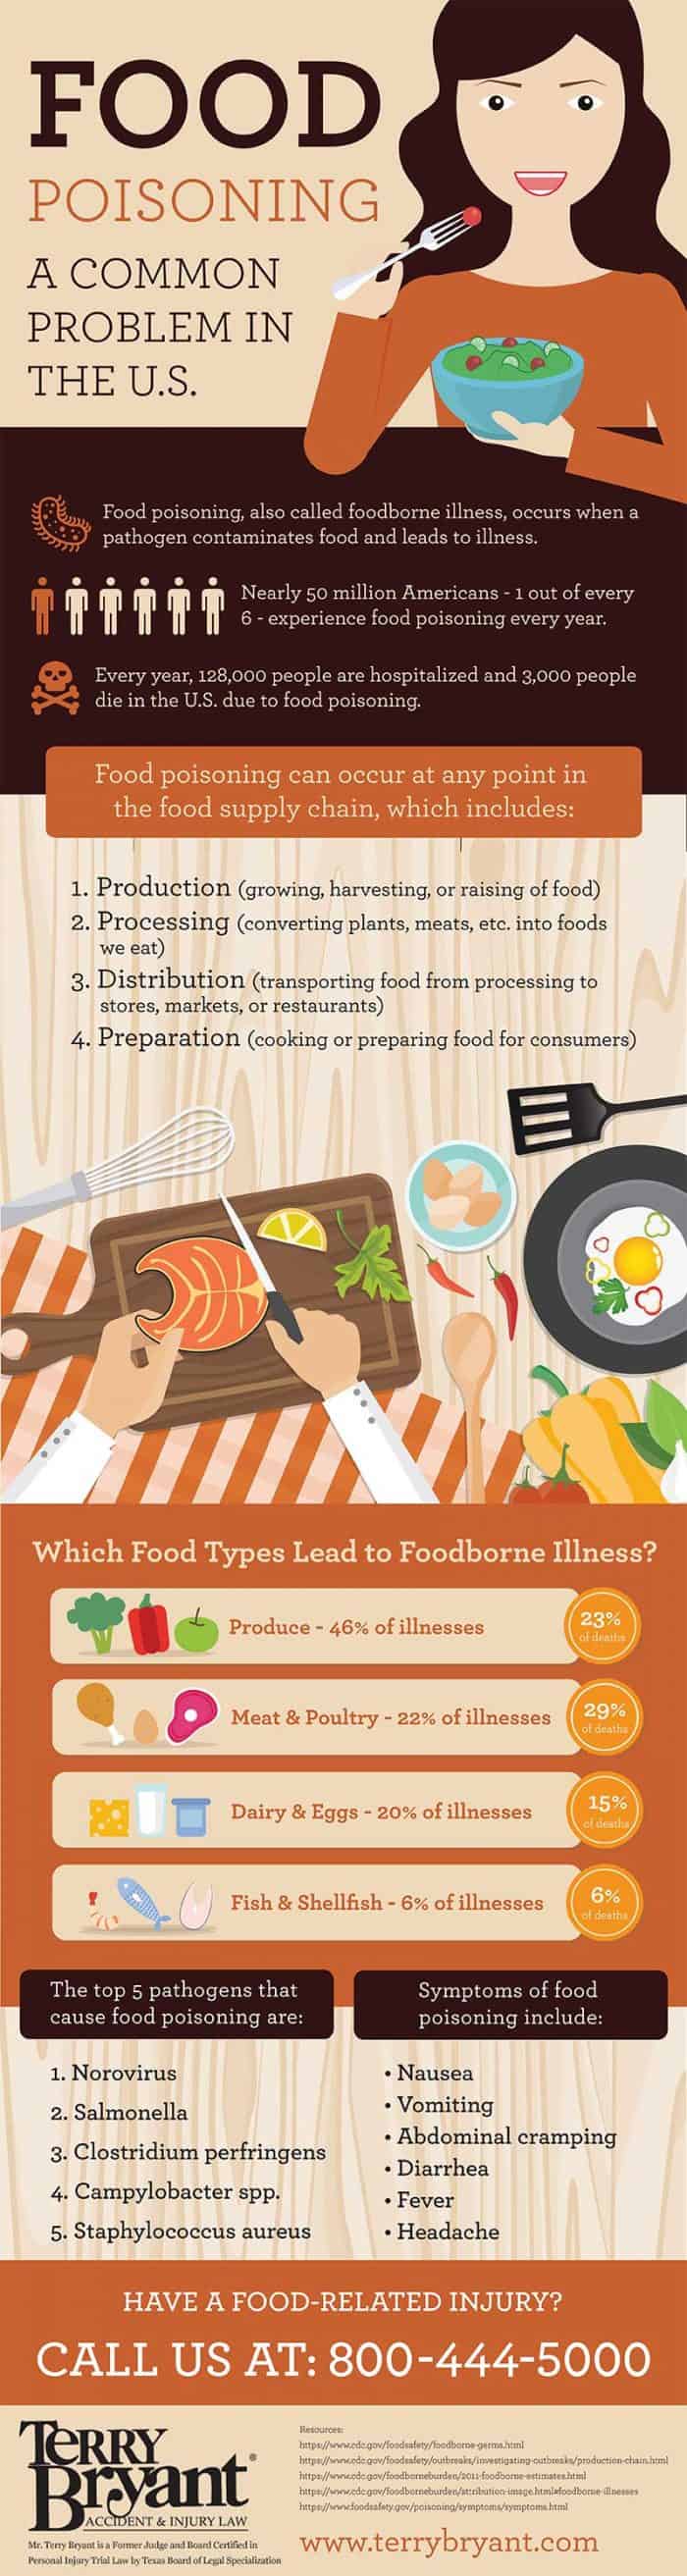 Infographic about the different causes of food poisoning